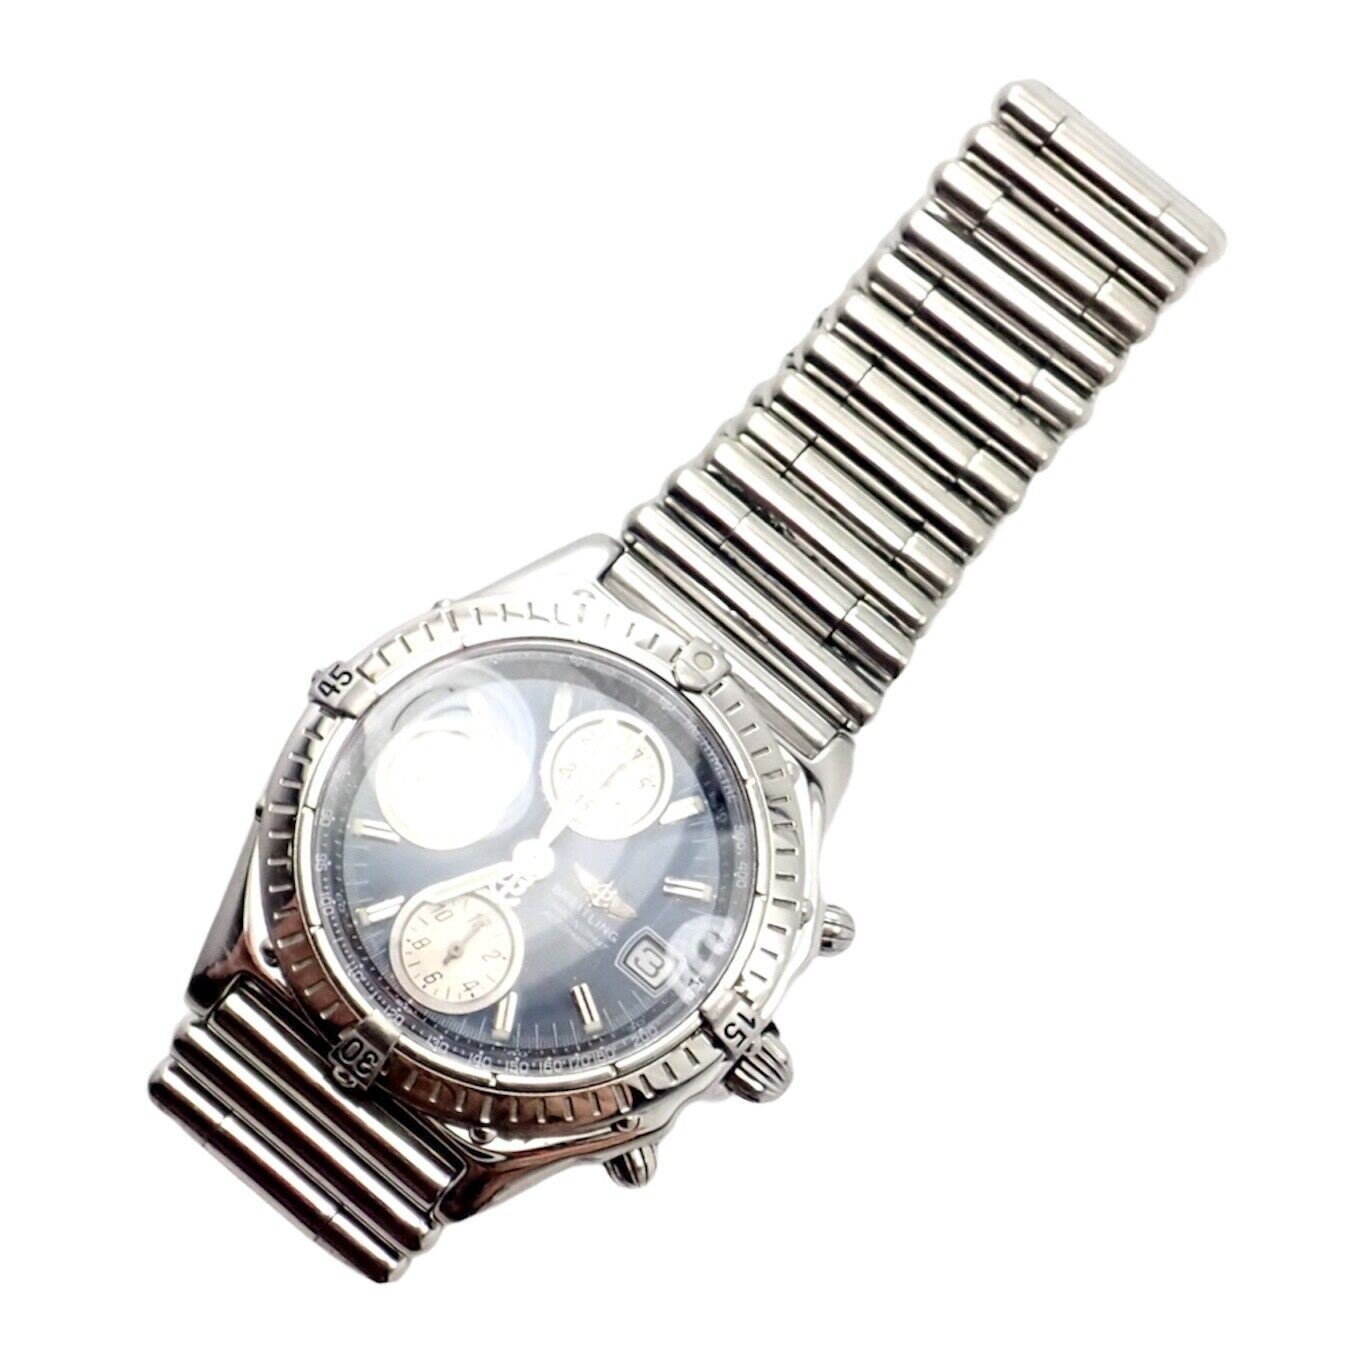 Breitling Jewelry & Watches:Watches, Parts & Accessories:Watches:Wristwatches Authentic! Breitling Chronomat Automatic Mens Watch Steel Blue Dial A13350